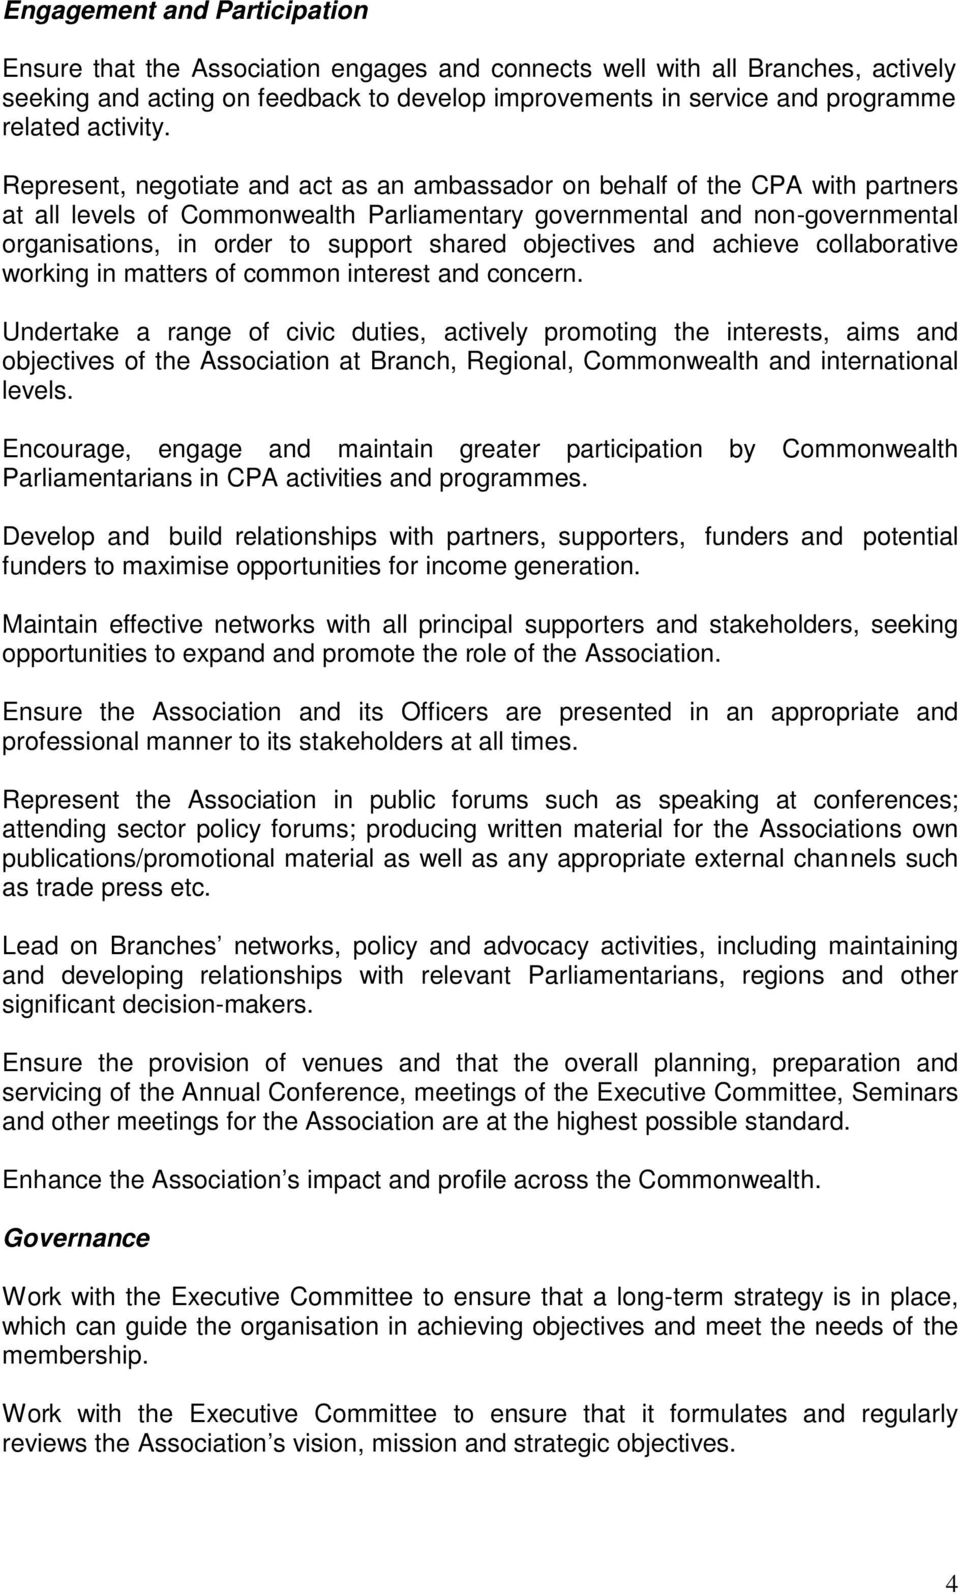 Represent, negotiate and act as an ambassador on behalf of the CPA with partners at all levels of Commonwealth Parliamentary governmental and non-governmental organisations, in order to support